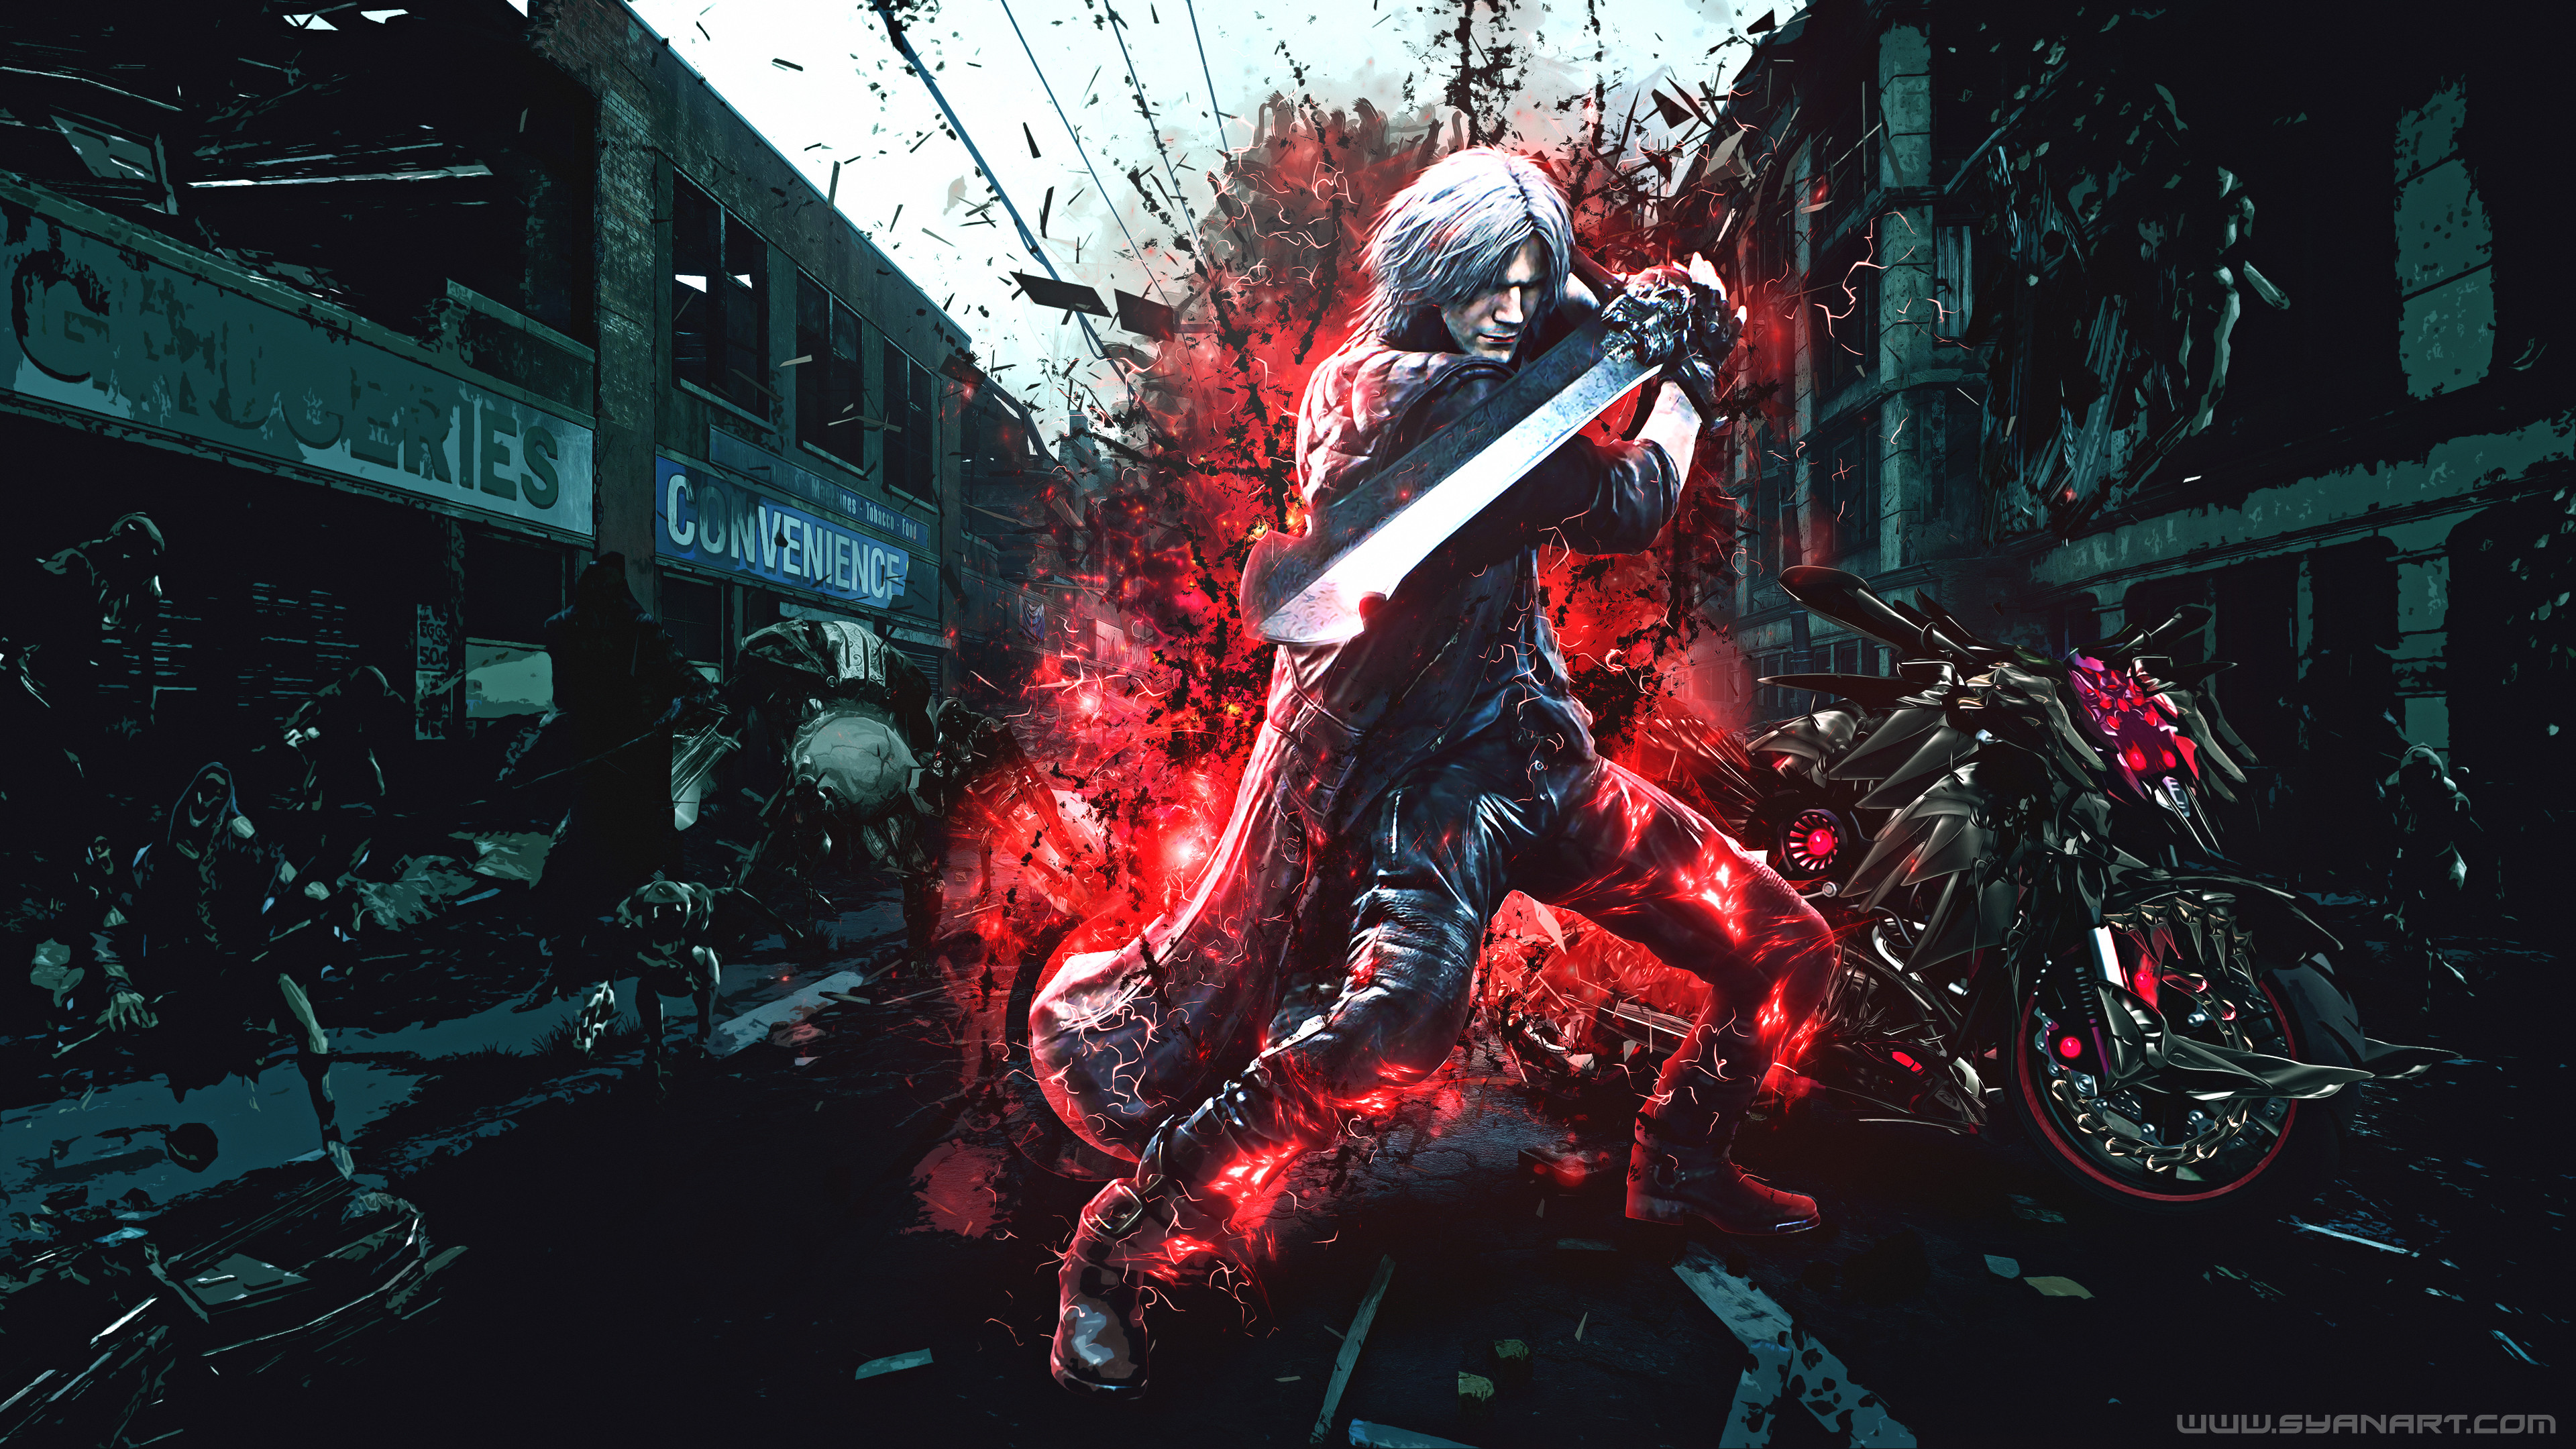 Devil May Cry 5 Wallpaper edit by sirR34 on DeviantArt